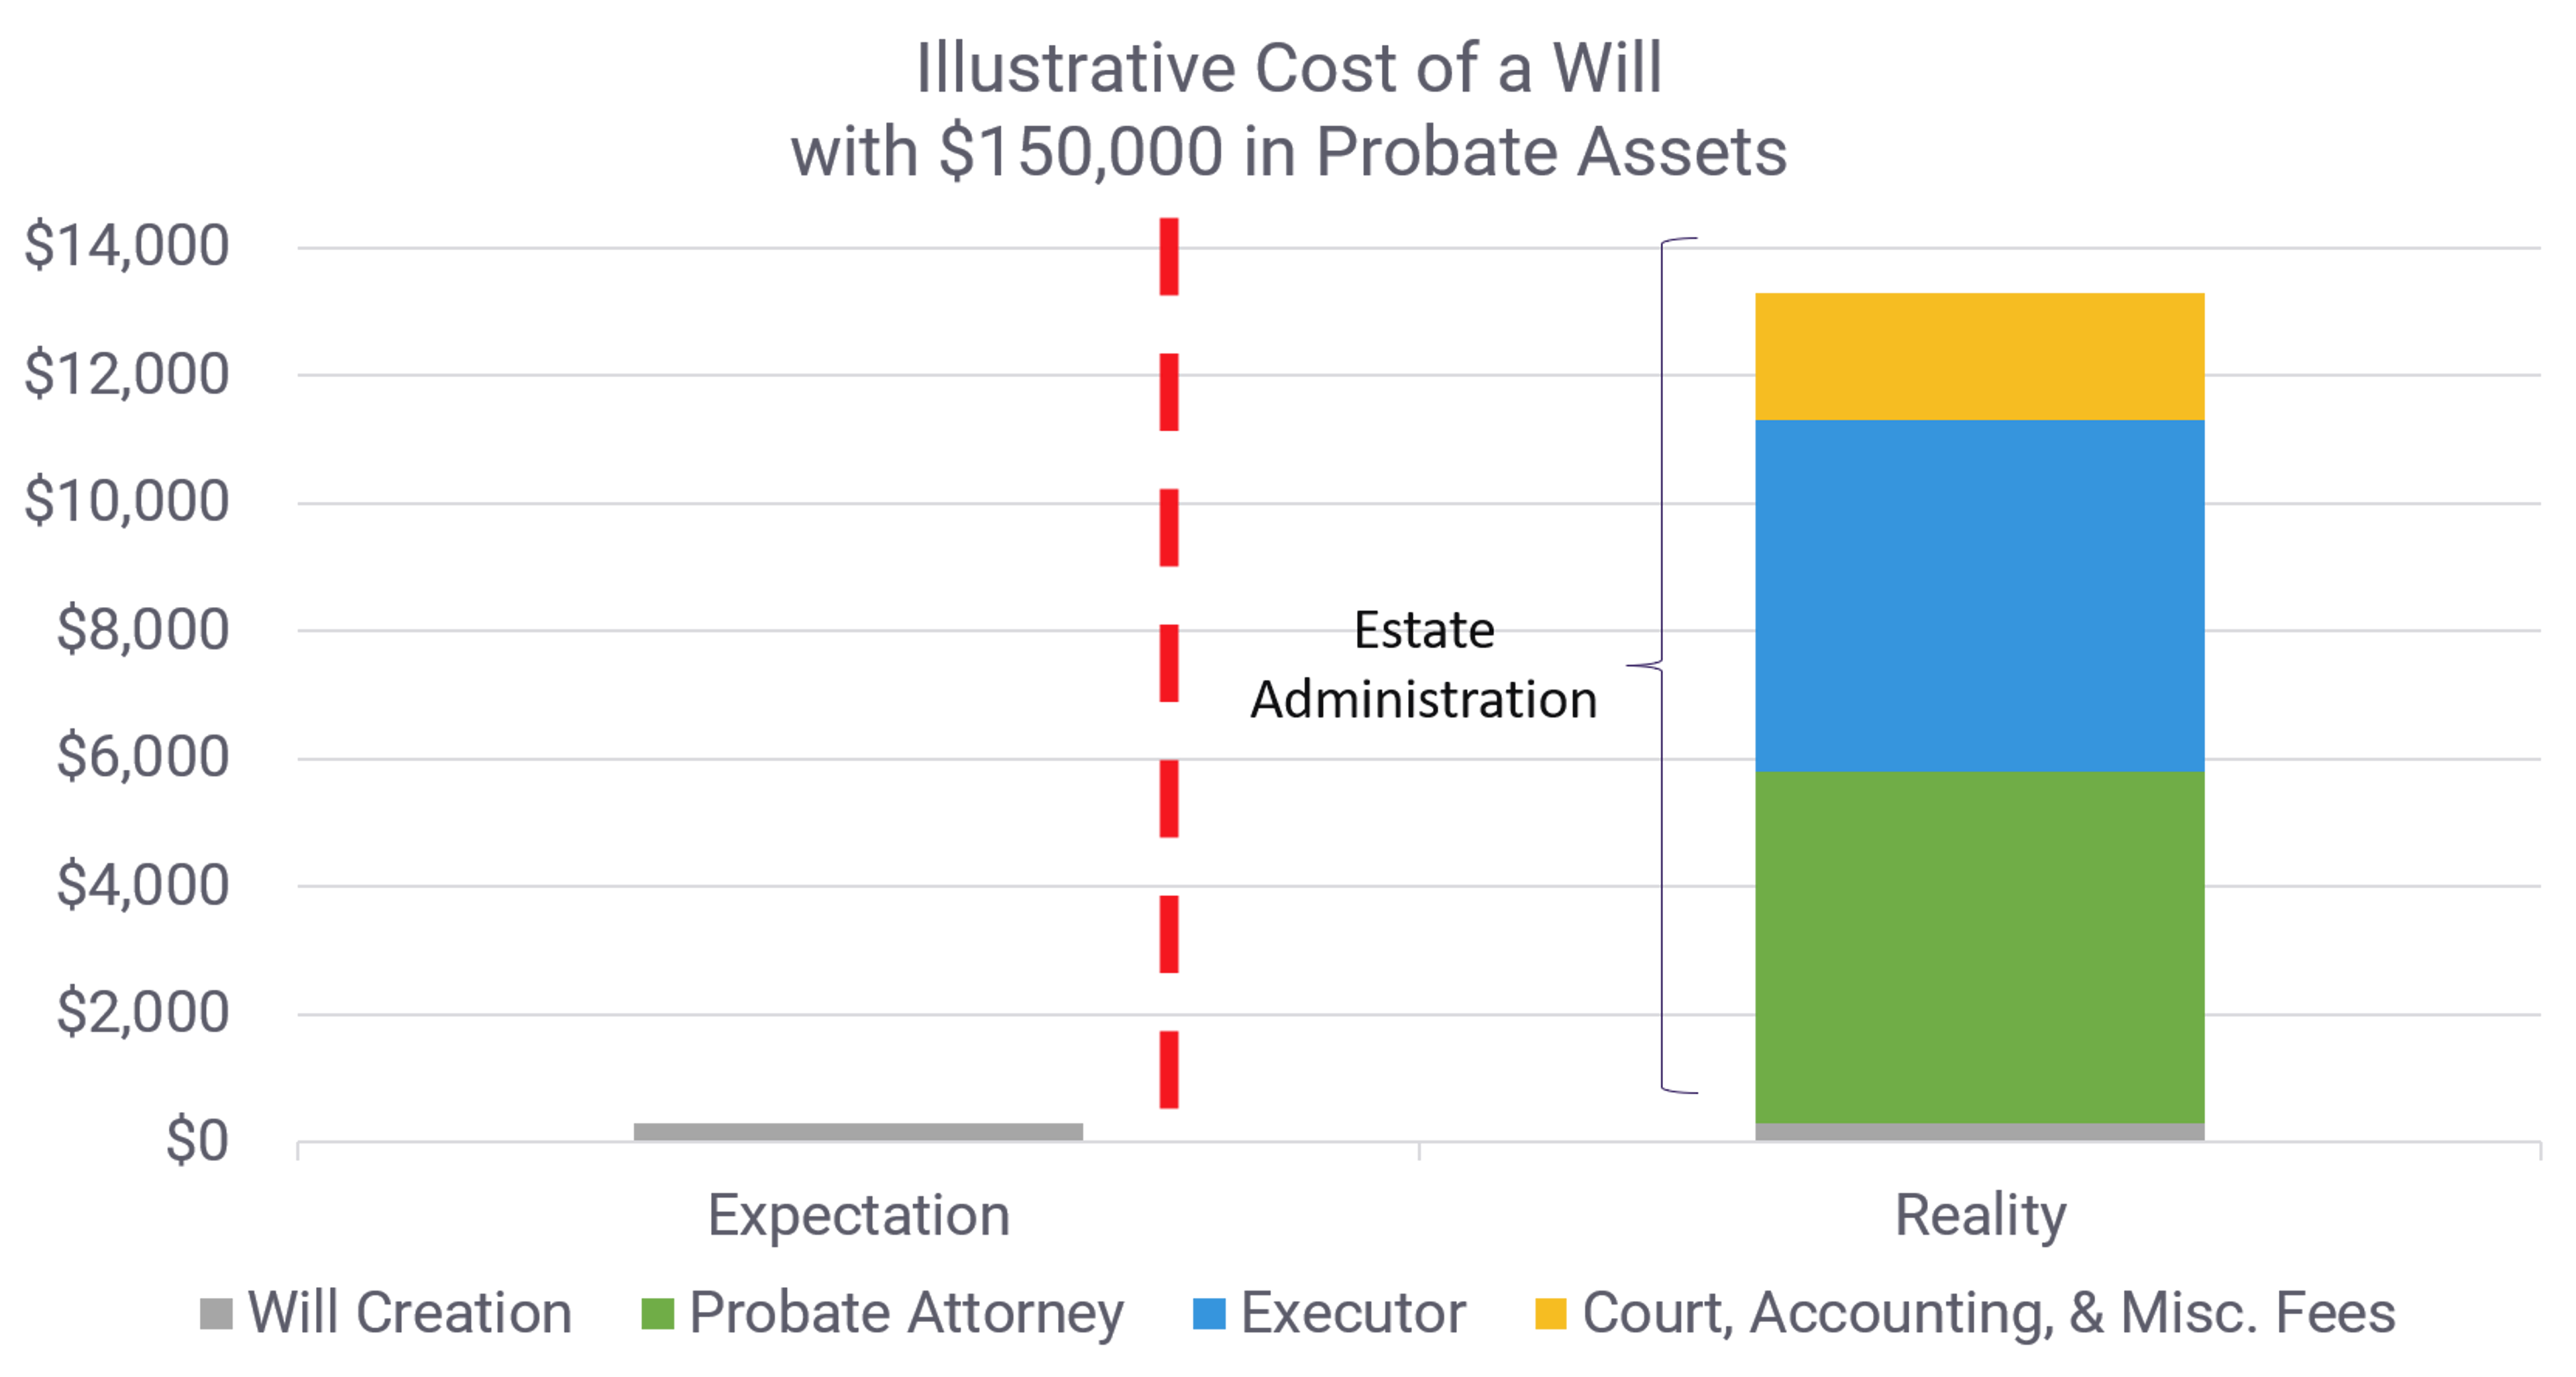 Illustrative cost of administering a last will in California